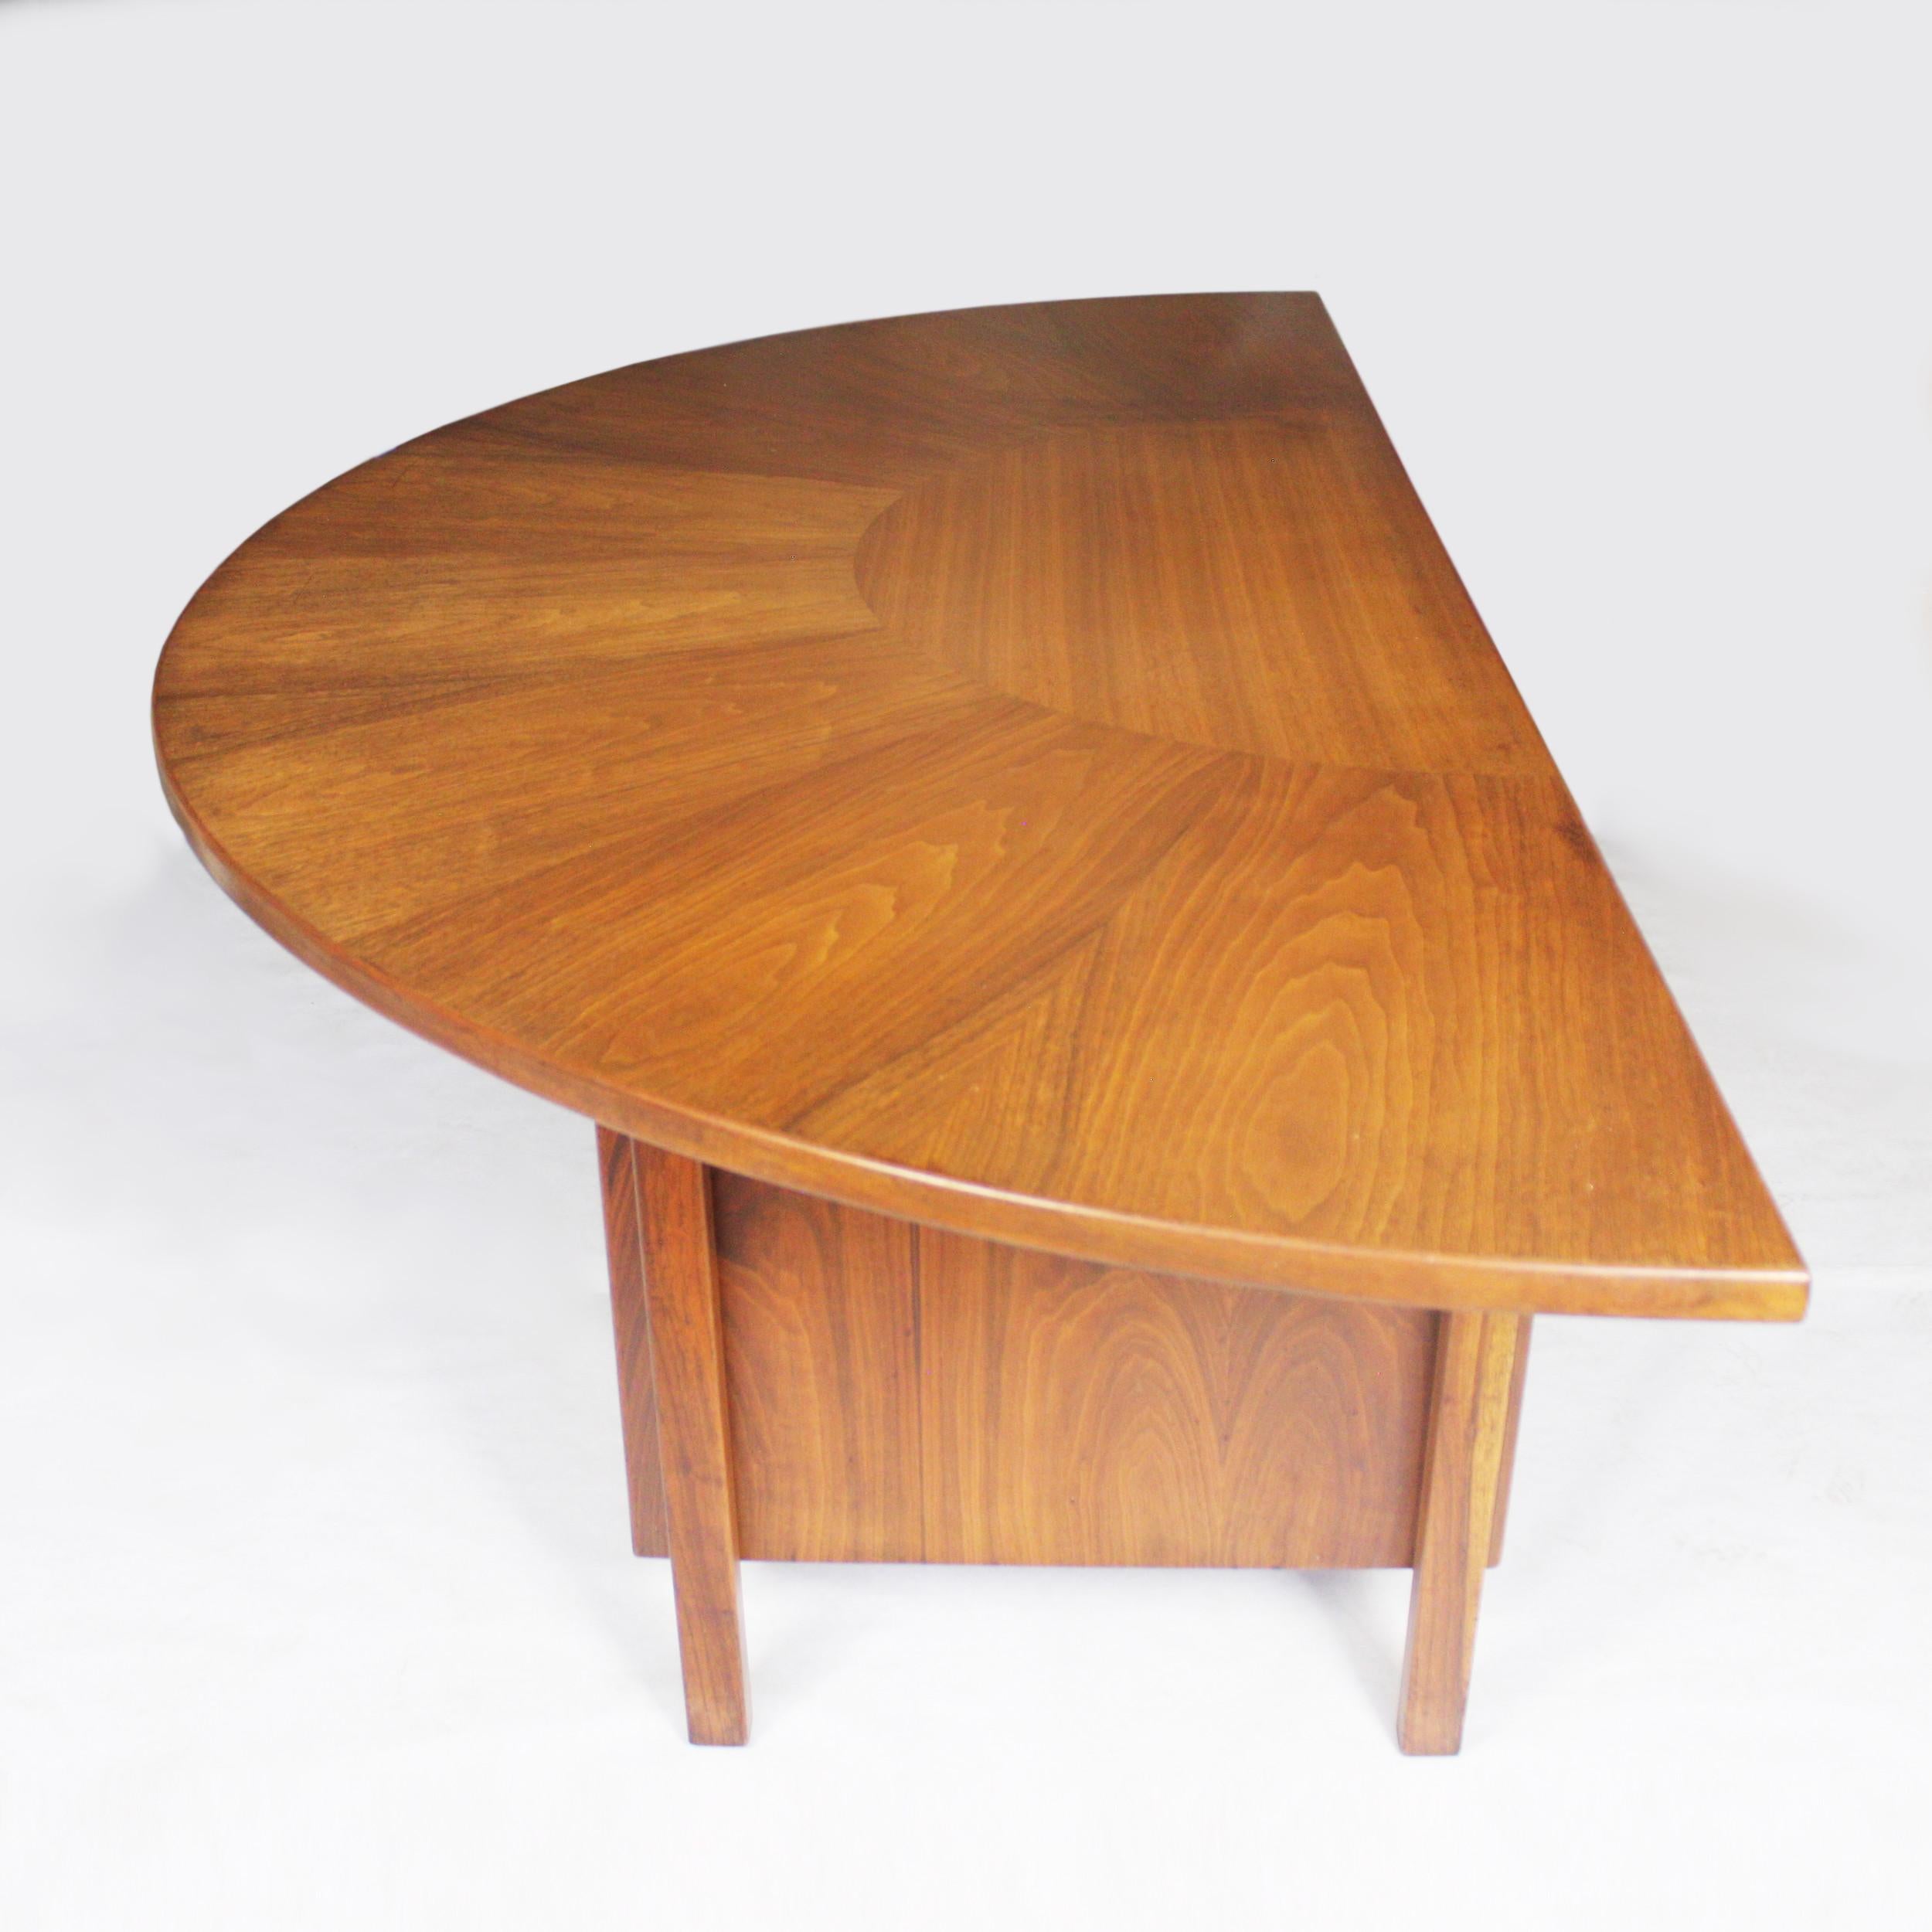 Mid-20th Century Spectacular Mid-Century Modern Walnut Demilune Executive Desk by Jens Risom For Sale